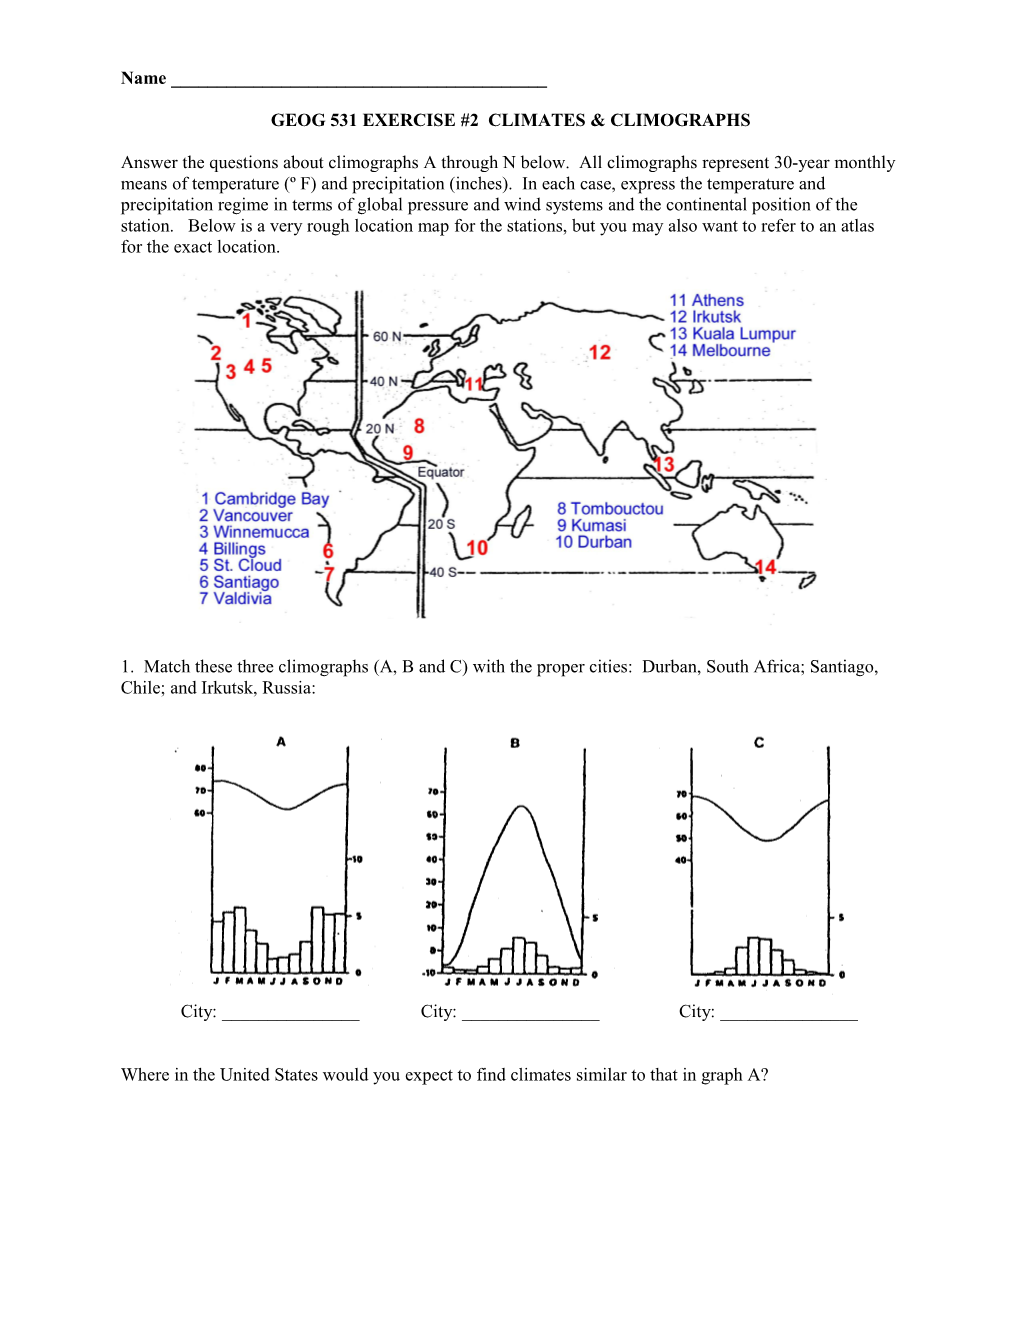 Geog 431/531 In-Class Exercise #2 Climates & Climographs